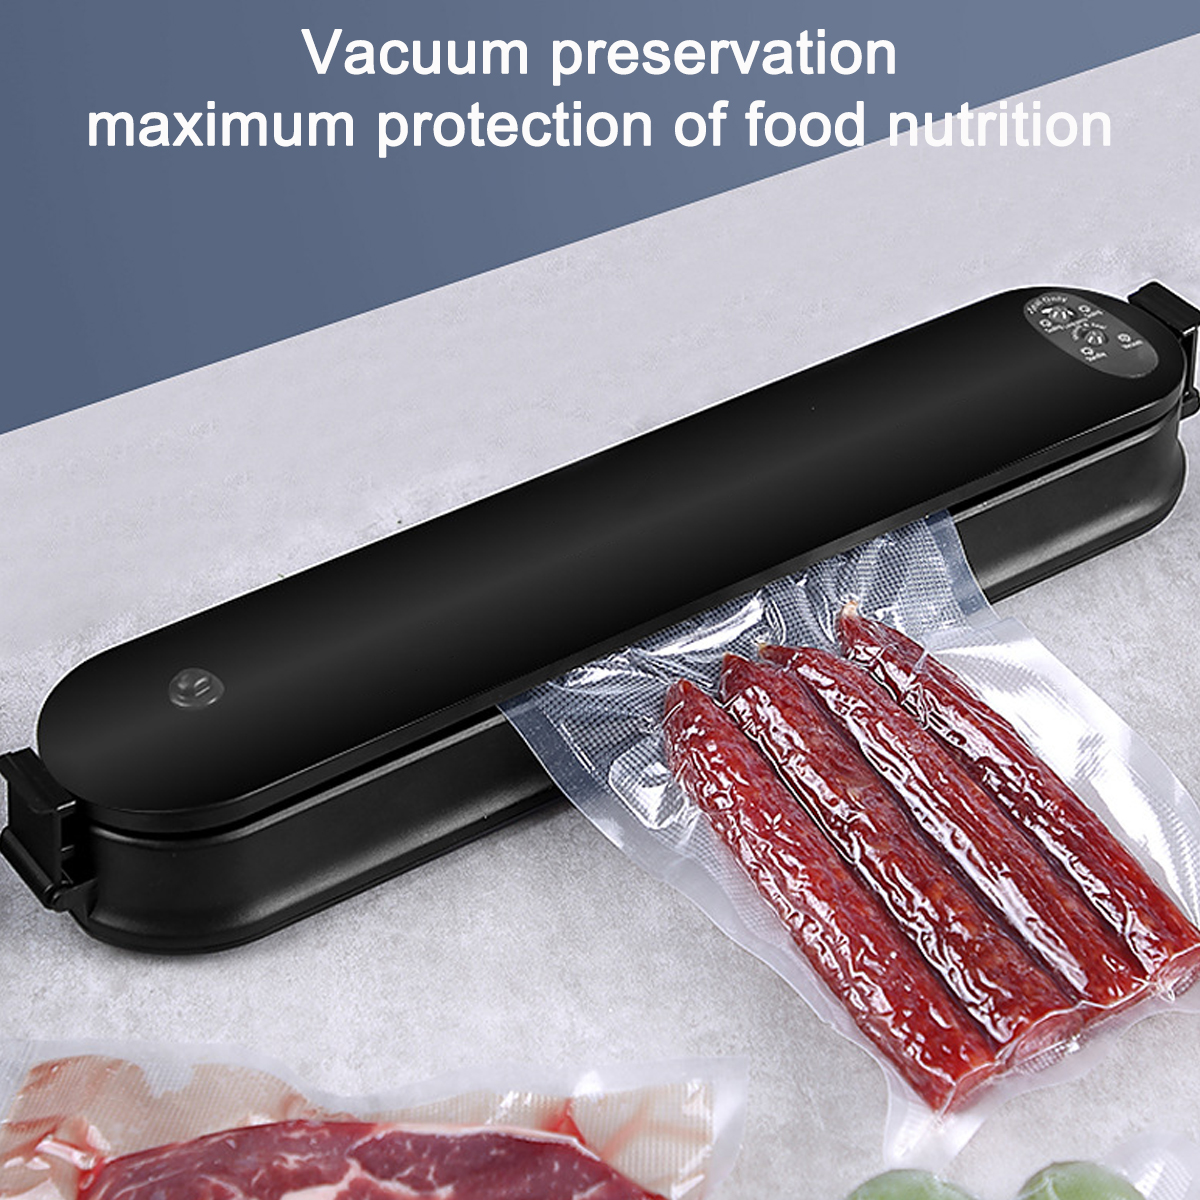 Electric-Food-Vacuum-Sealer-Powerful-Motor-Quick-Sealing-3-Fresh-keeping-Modes-for-Food-Preservation-1905323-5